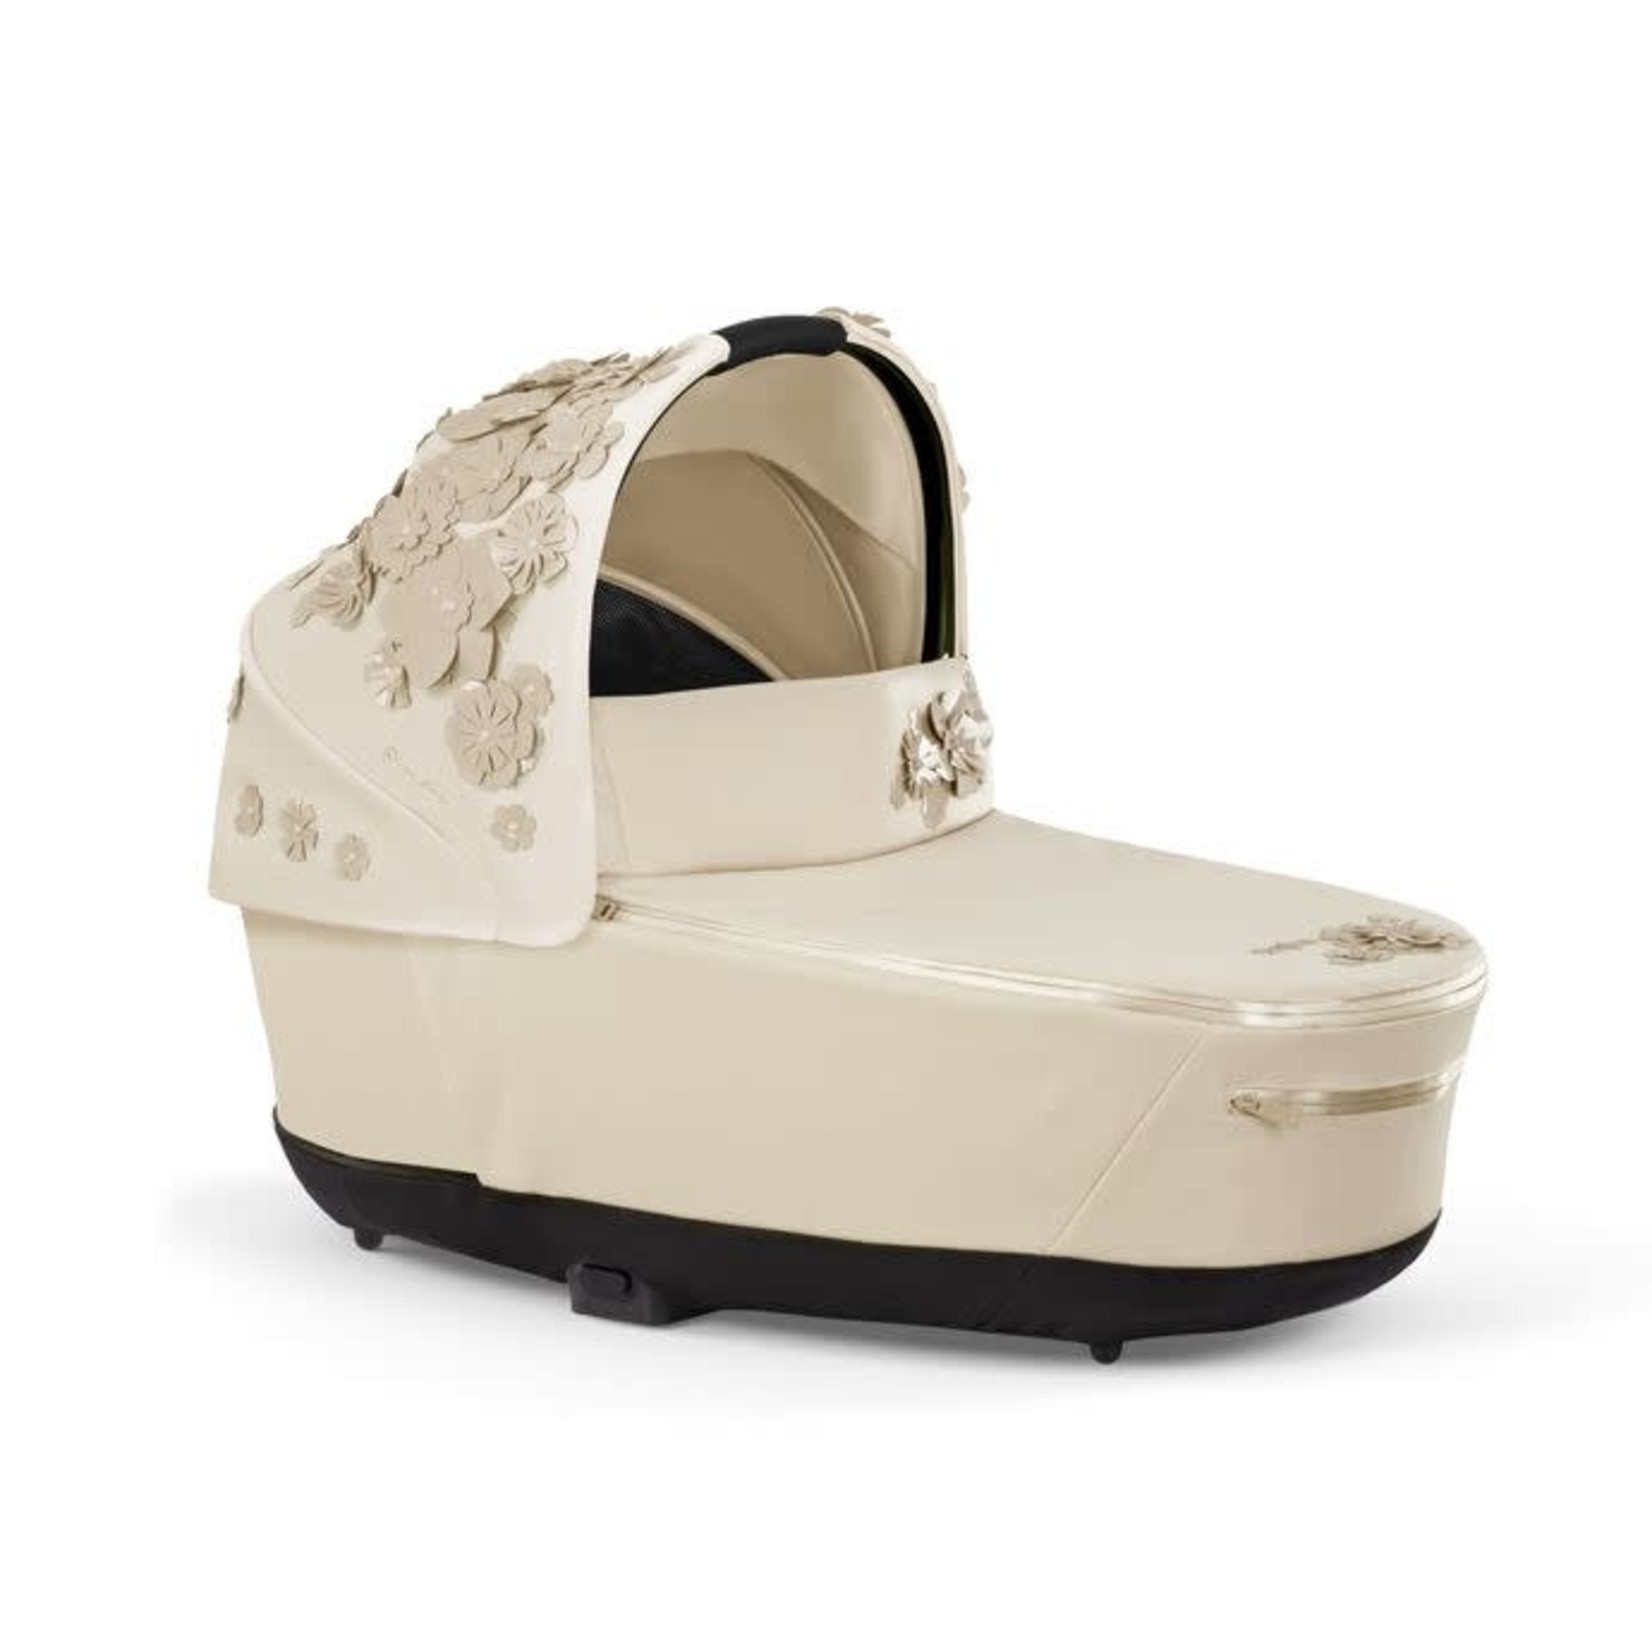 Cybex Priam Lux Carry Cot Nude Beige